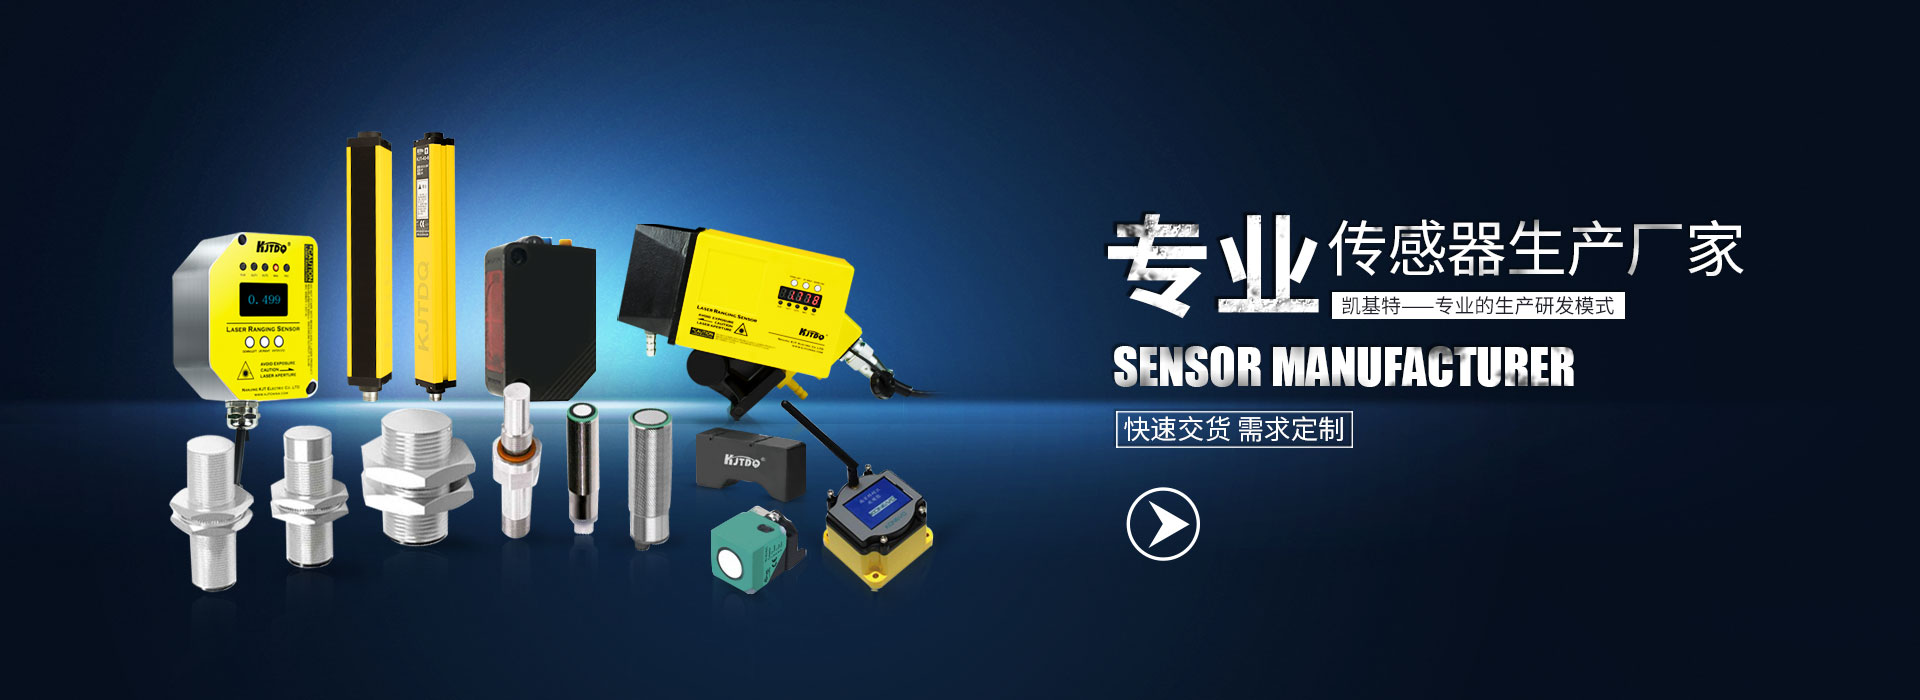 What is the function of the limit proximity sensor?